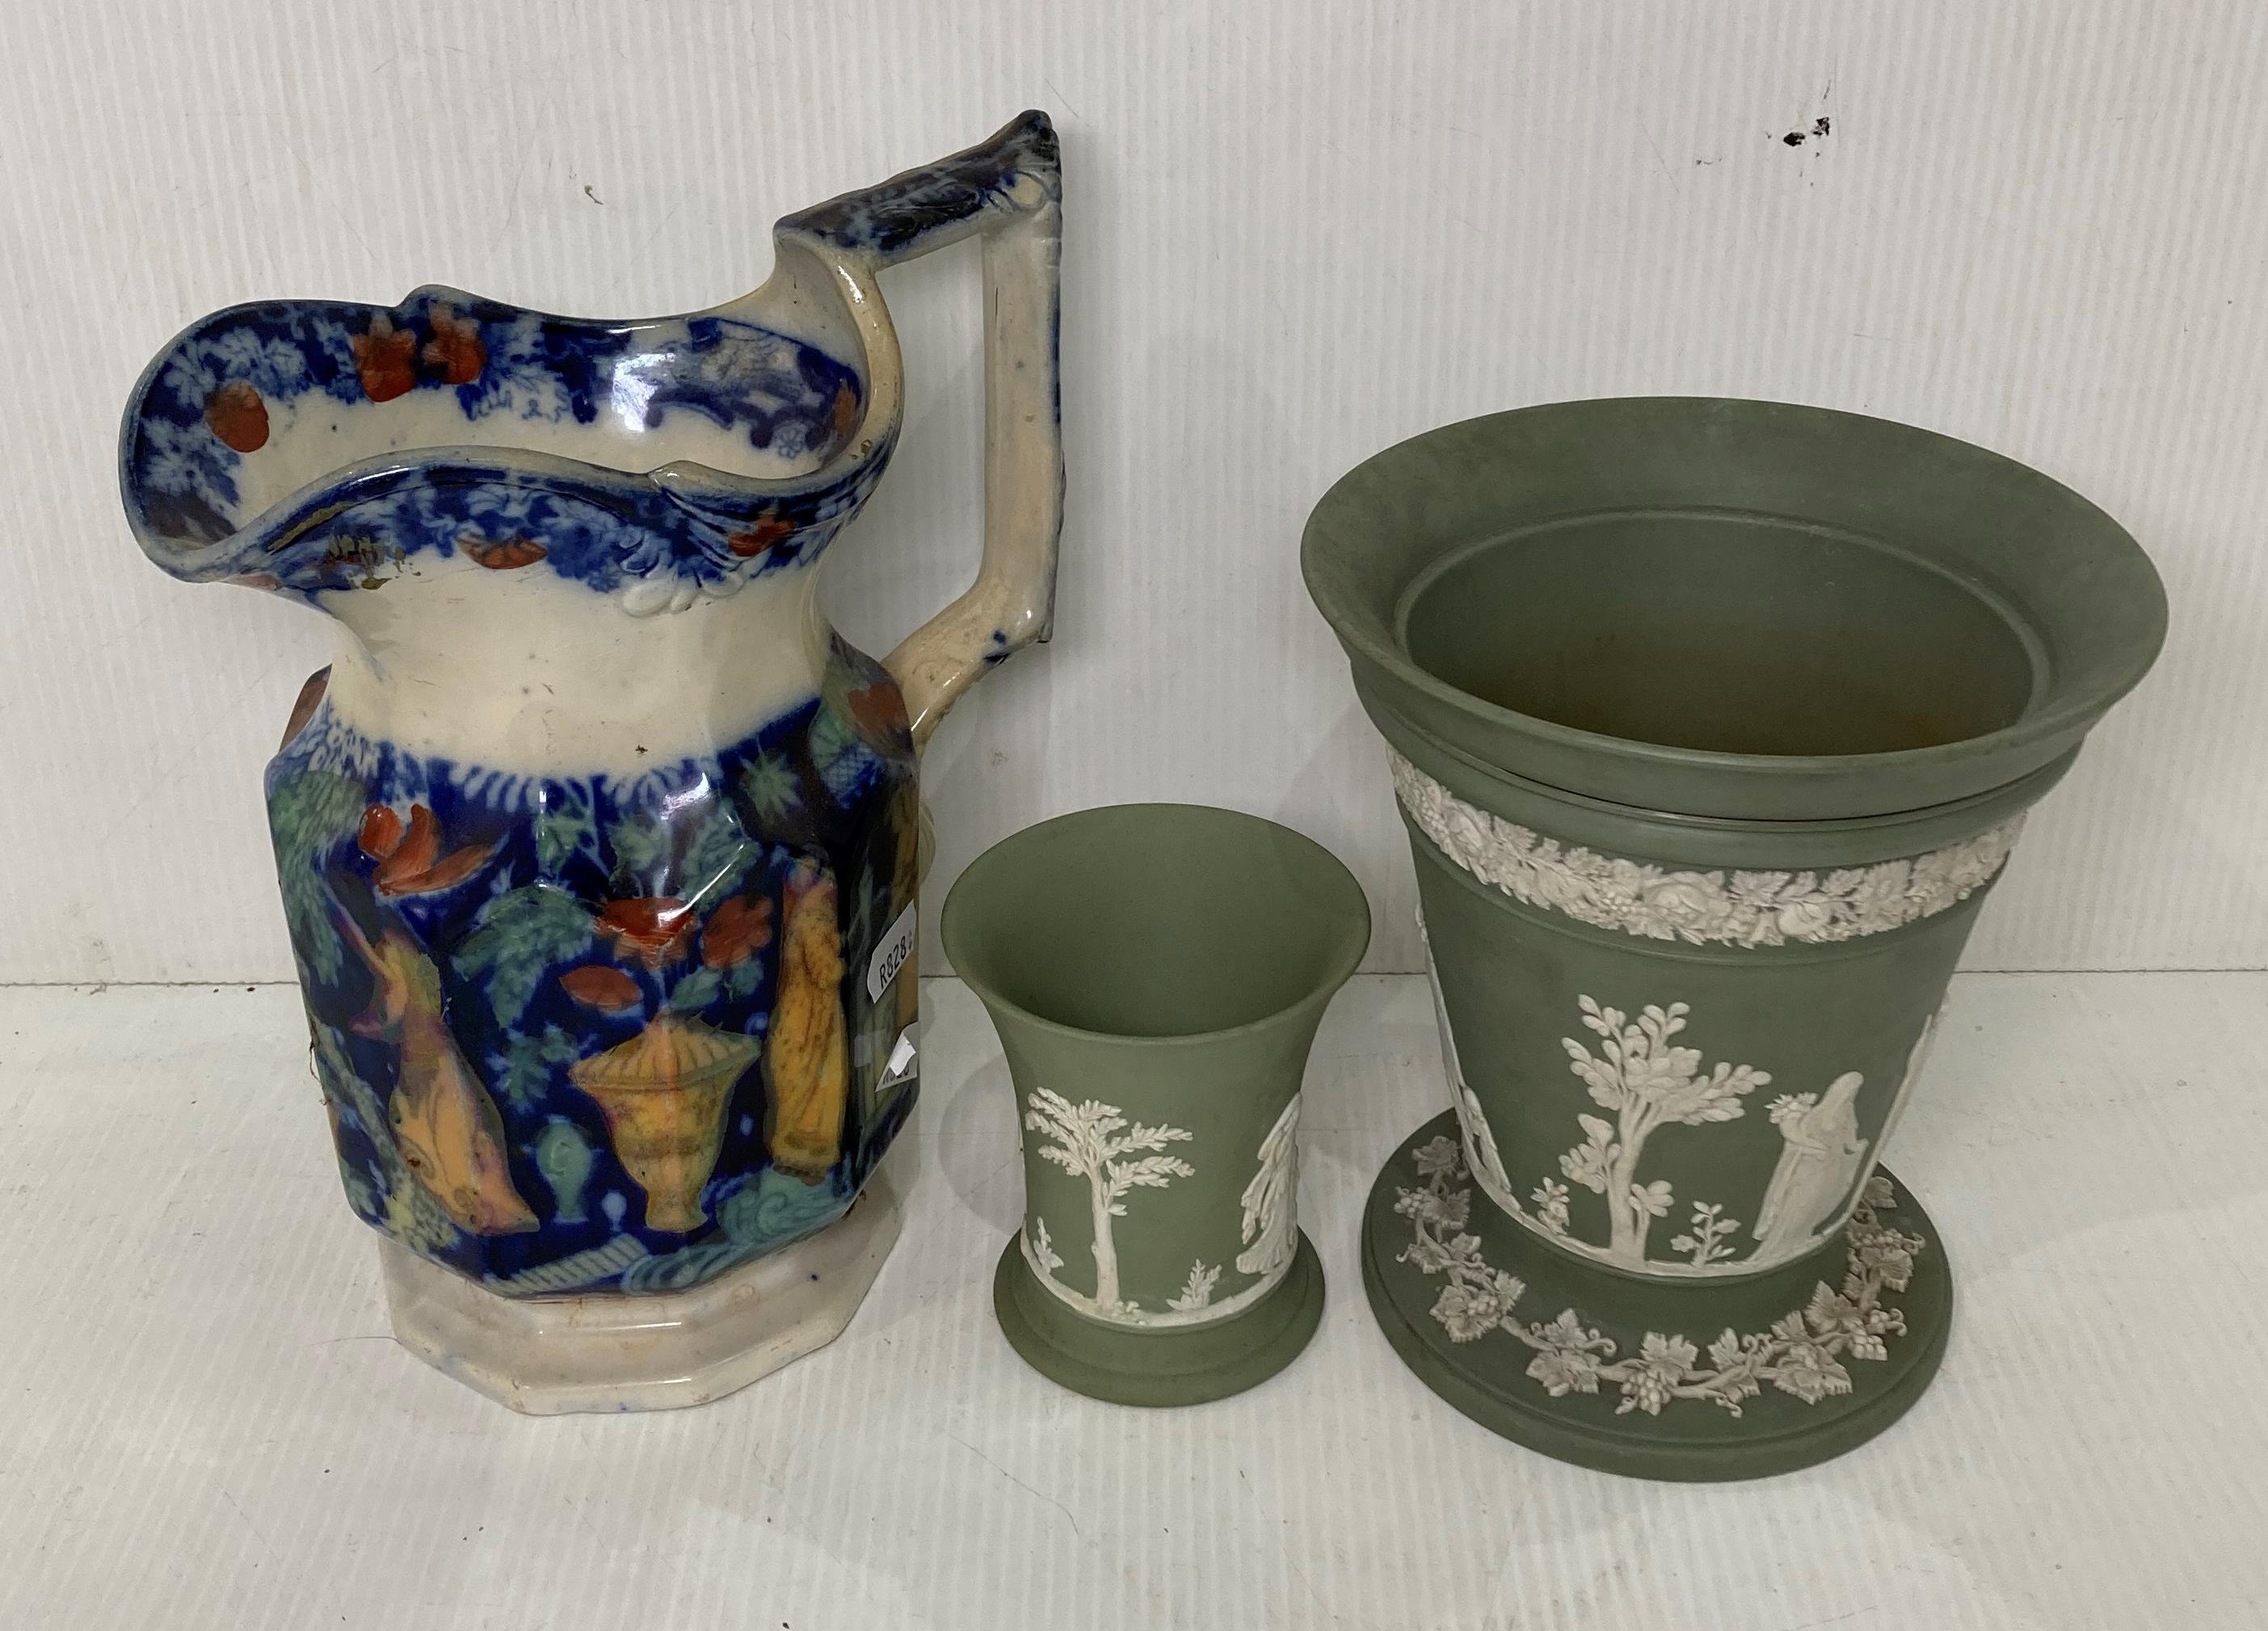 A vintage Italian style water jug and two green and white Wedgwood items (saleroom location: S3 - Image 2 of 3